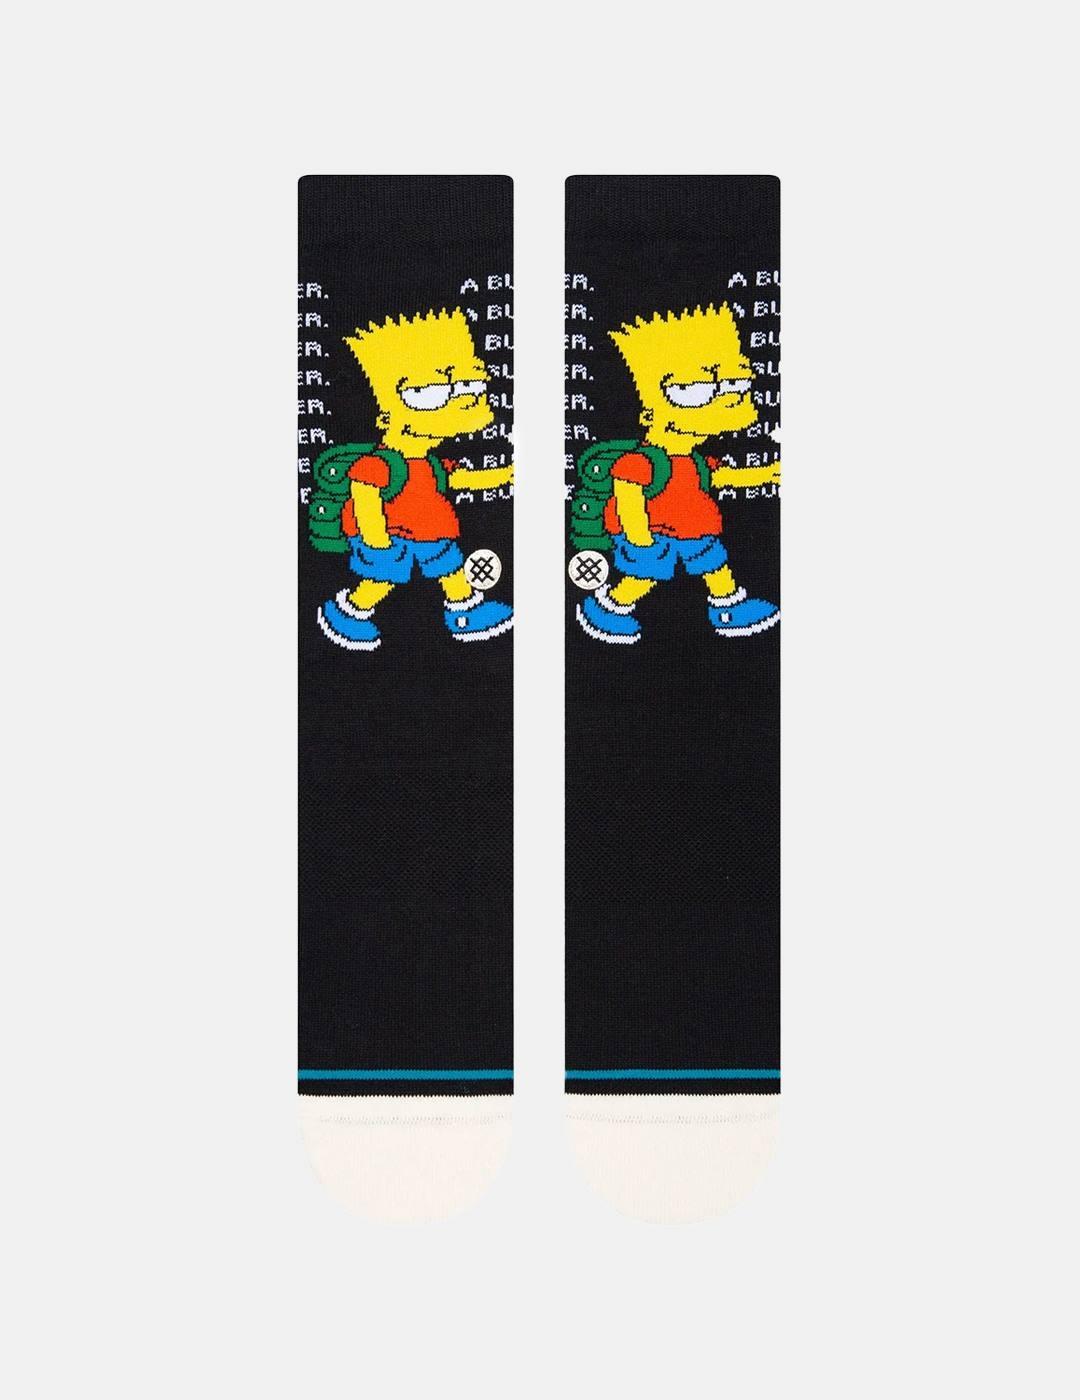 Calcetines Stance Troubled Bart Simpsons Negro